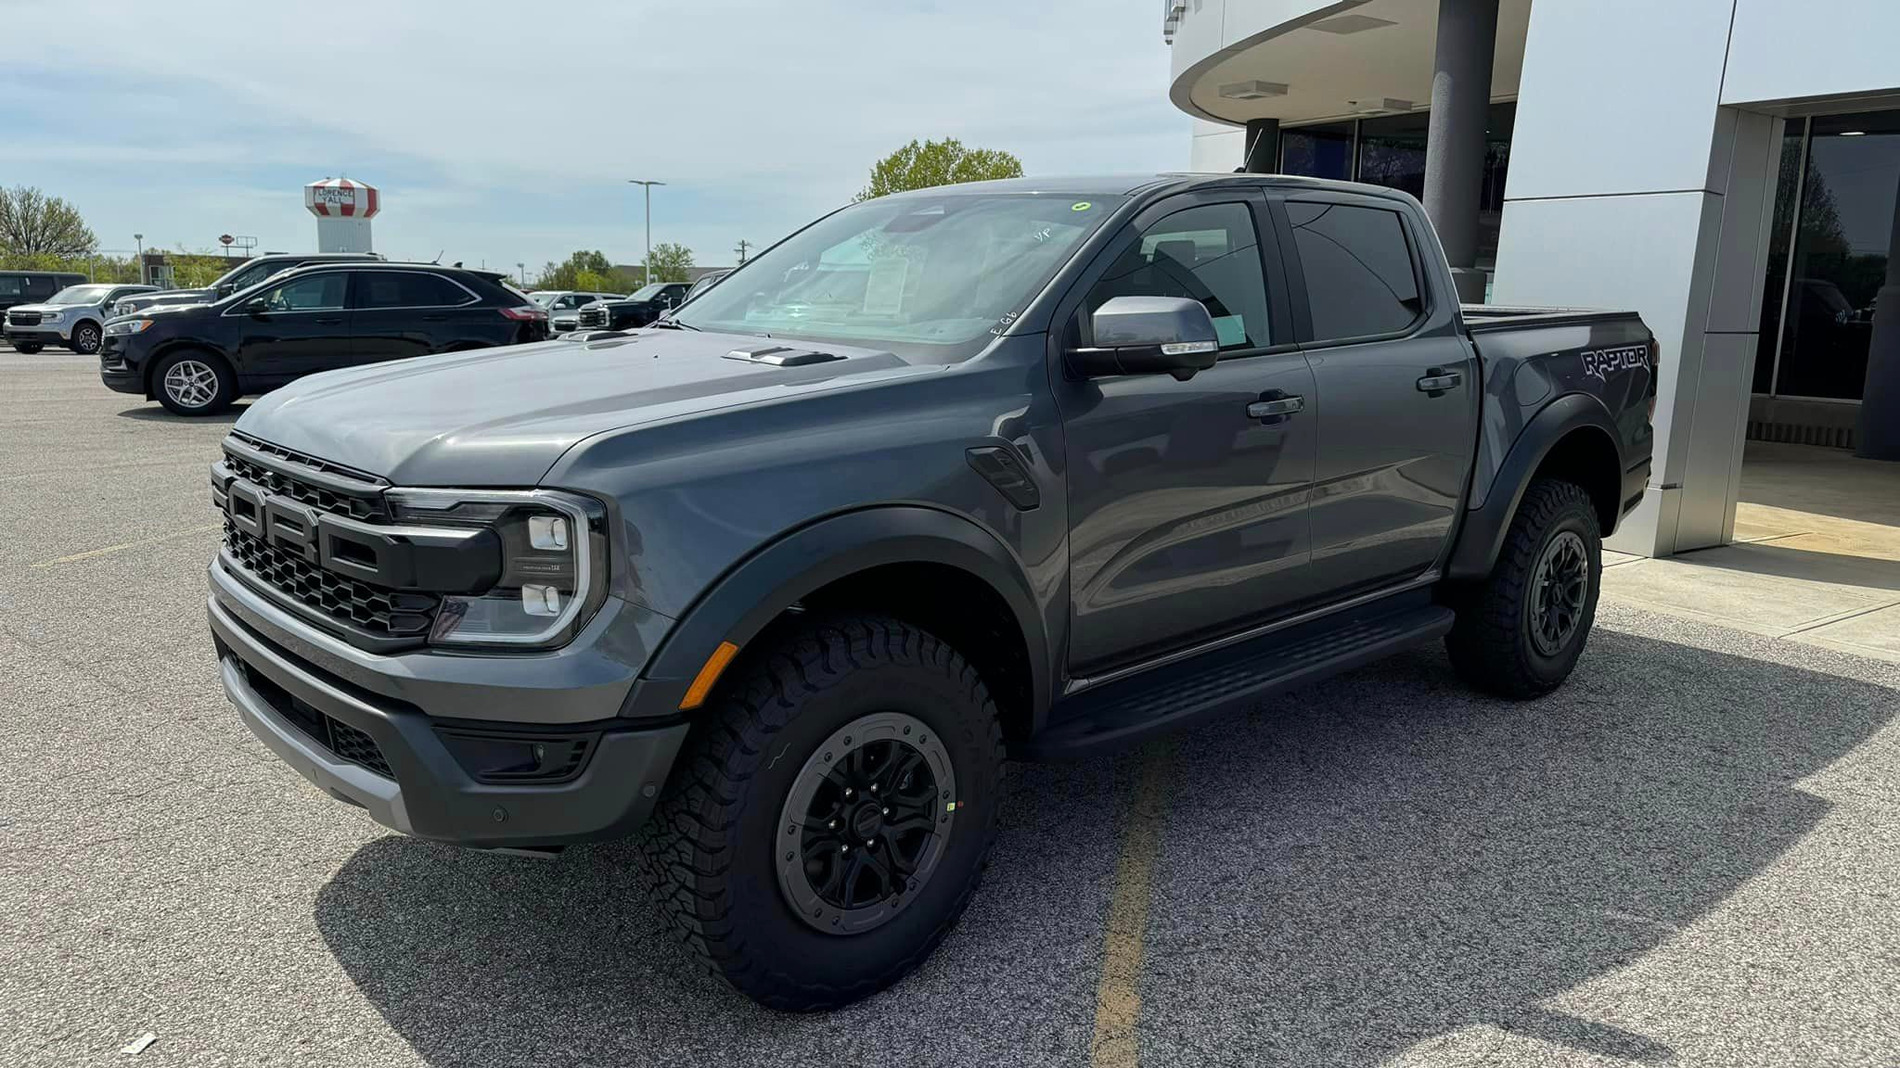 Ford Ranger Picked up my Baby Raptor (No Pre-Order, Paid MSRP, bought in Kentucky 26APR) 438229853_10106876284343234_7174748689498233069_2